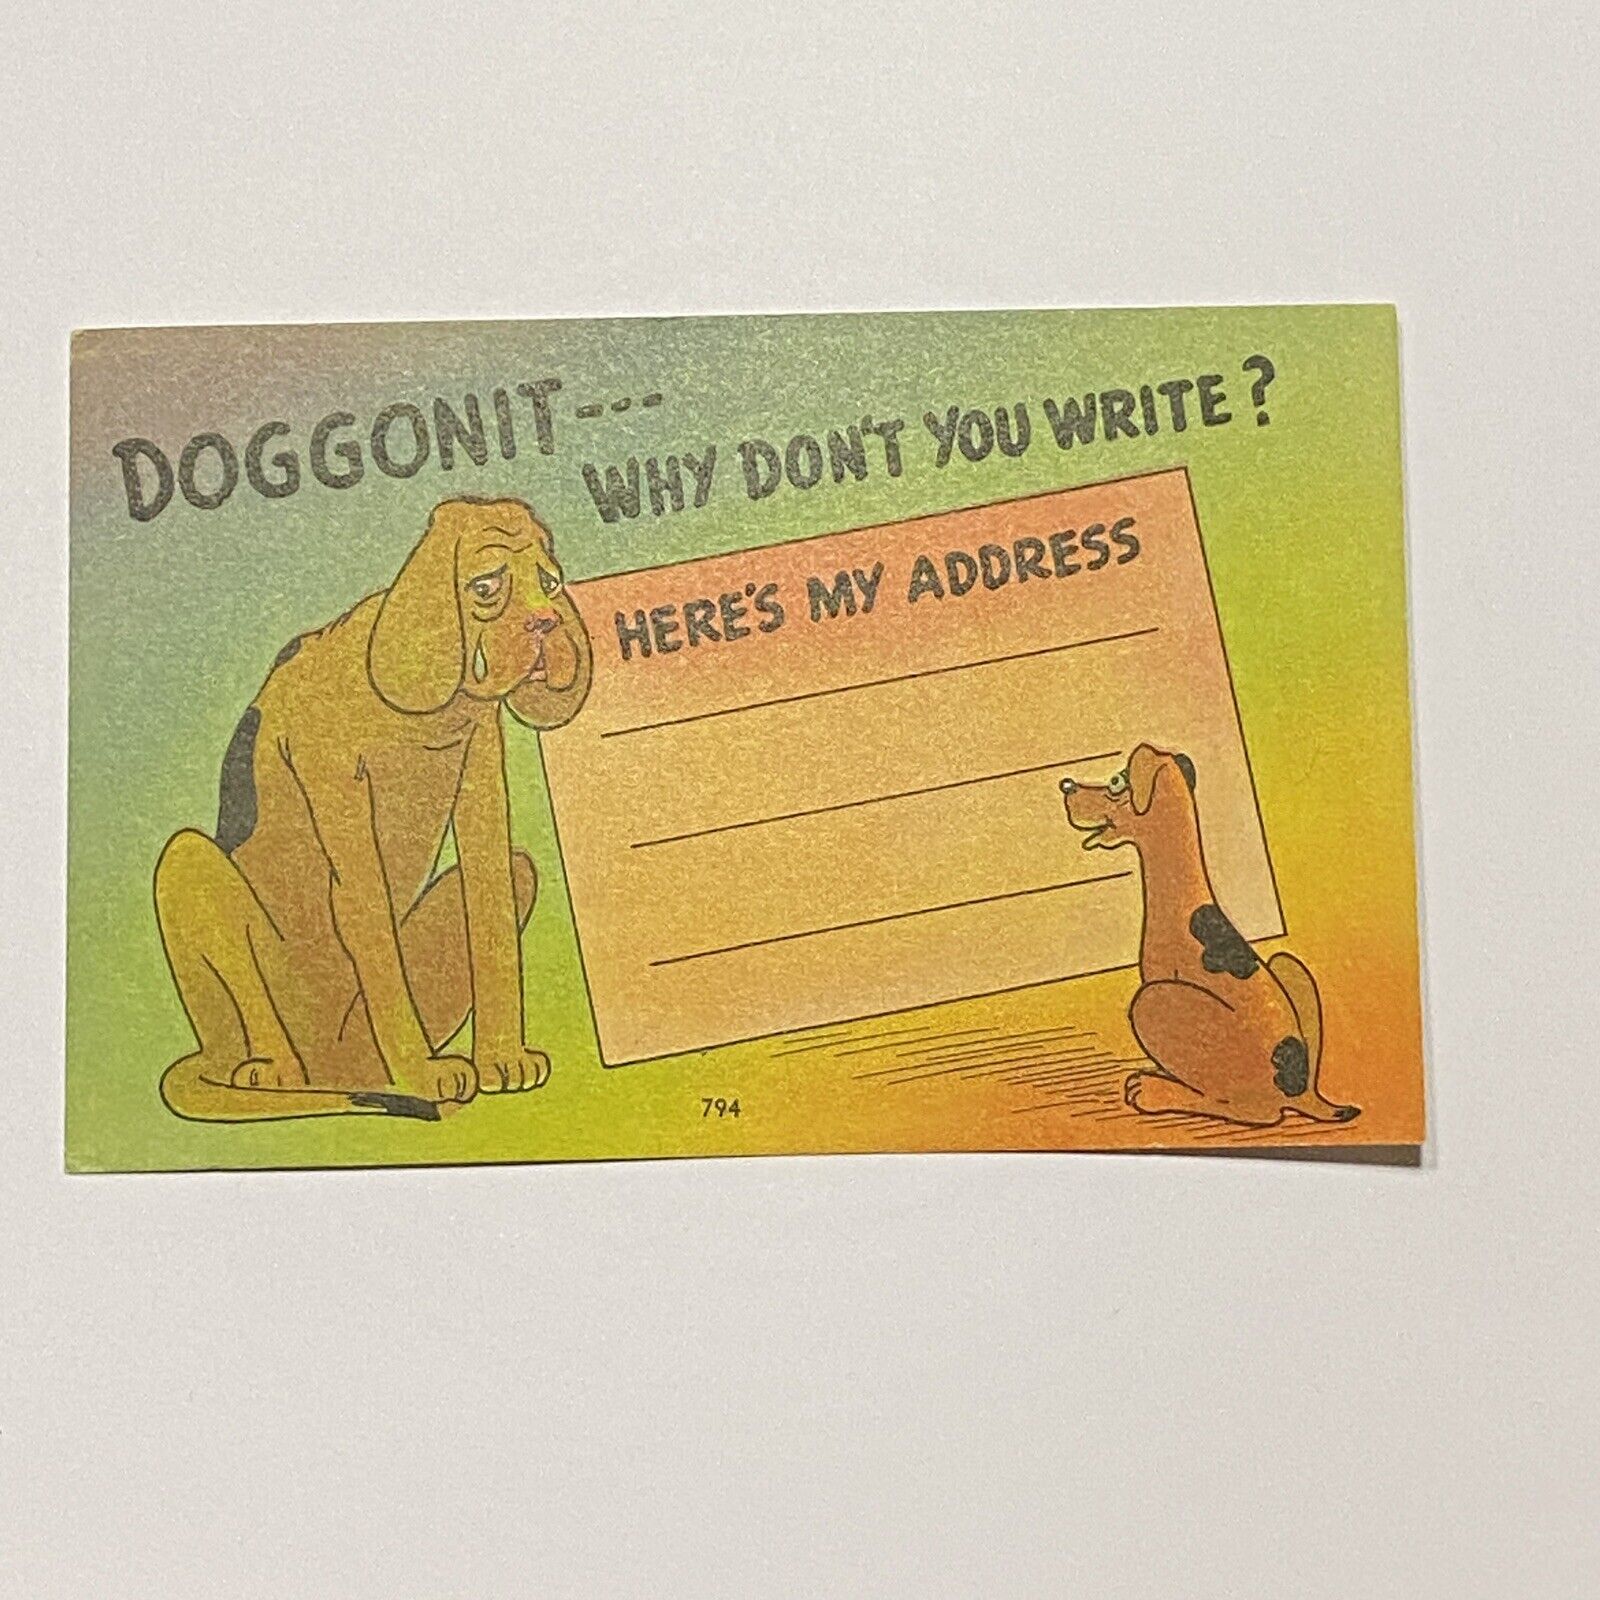 Doggonit-Why Don\'t You Write? Humor Postcard 2 Dogs c1940’s